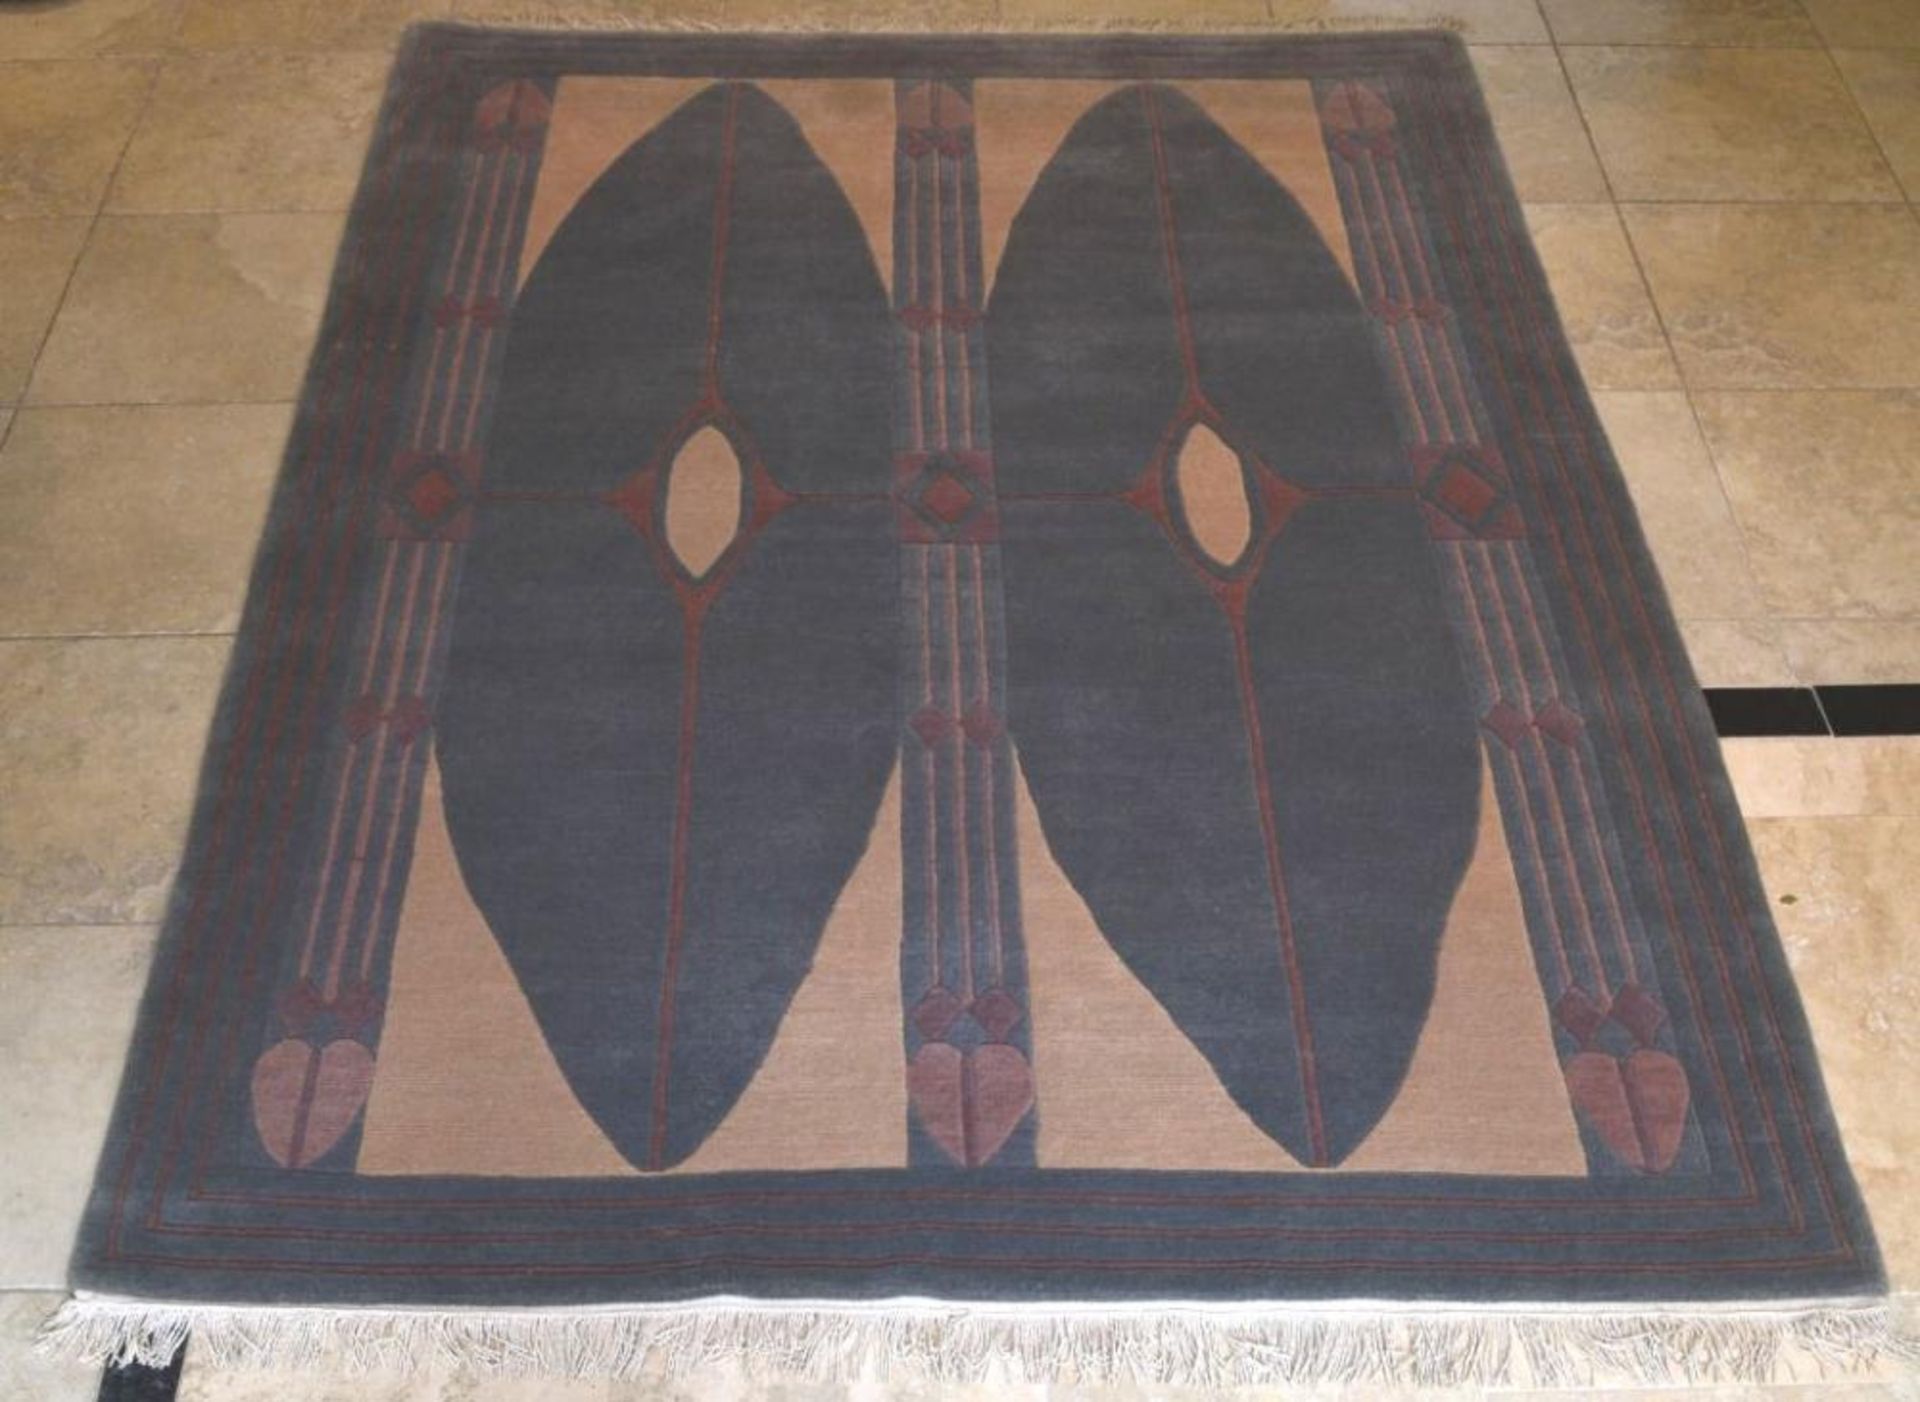 1 x Hand Knotted Mackintosh Design Nepalese Carpet - 100% Wool - Dimensions: 174x247cm - Unused - NO - Image 11 of 12